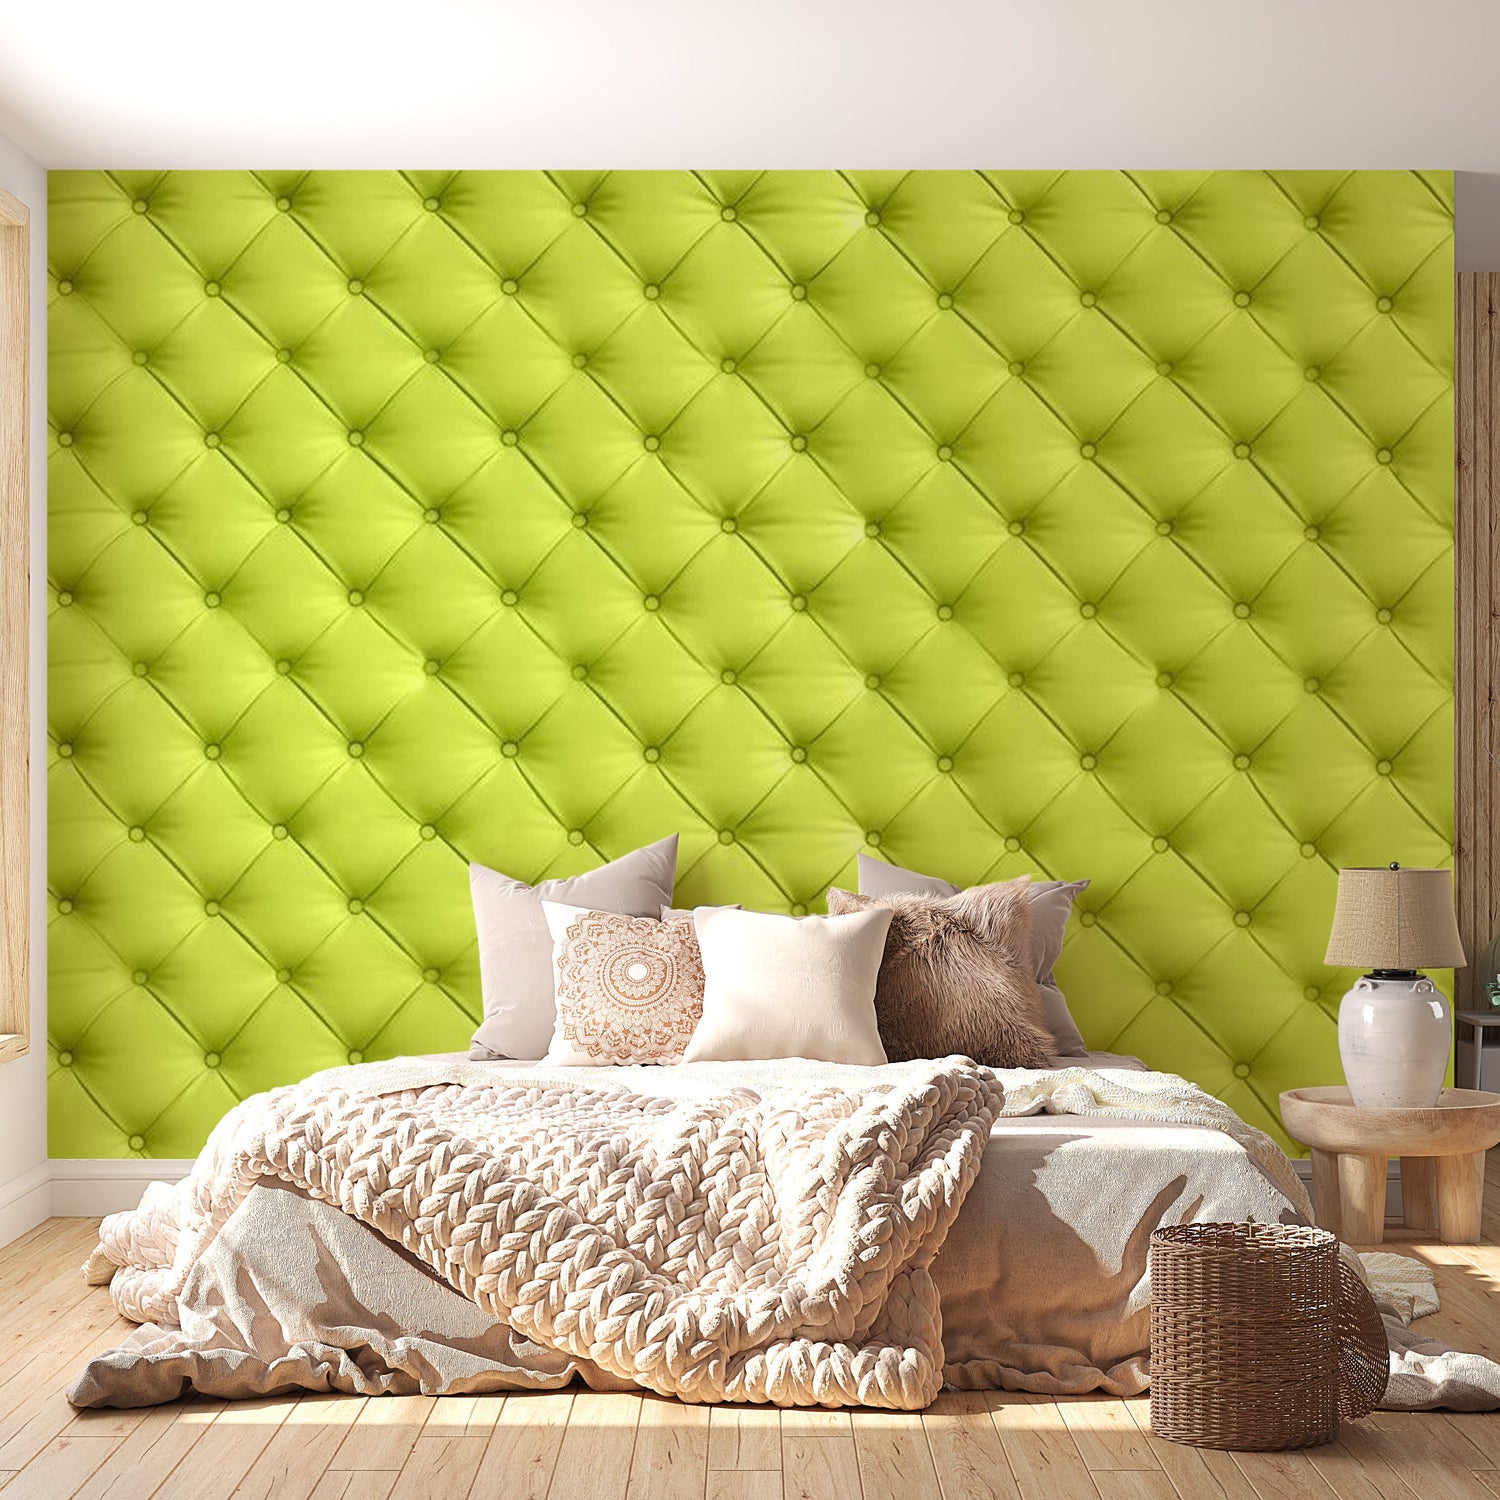 Peel & Stick Wall Mural - Lime Chesterfield Pattern - Removable Wall Decals